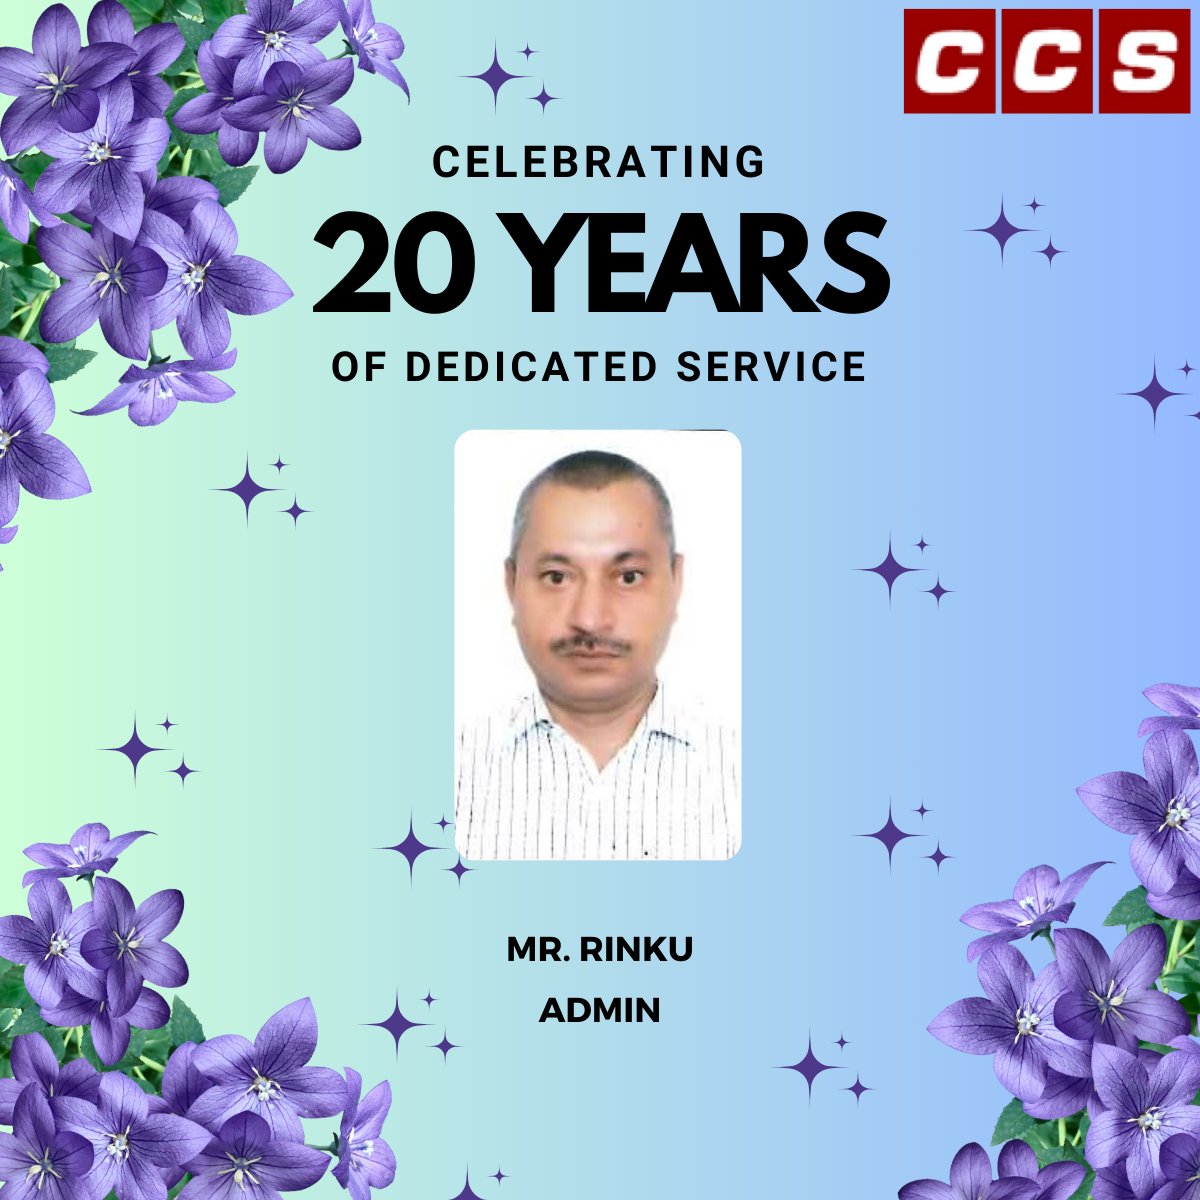 Celebrating Rinku's incredible 20 years journey with us!

Your dedication, hard work, and passion have been invaluable to our team. Here's to many more years of success and growth together. Congratulations on this milestone!

#WorkAnniversary #MilestoneAchievement